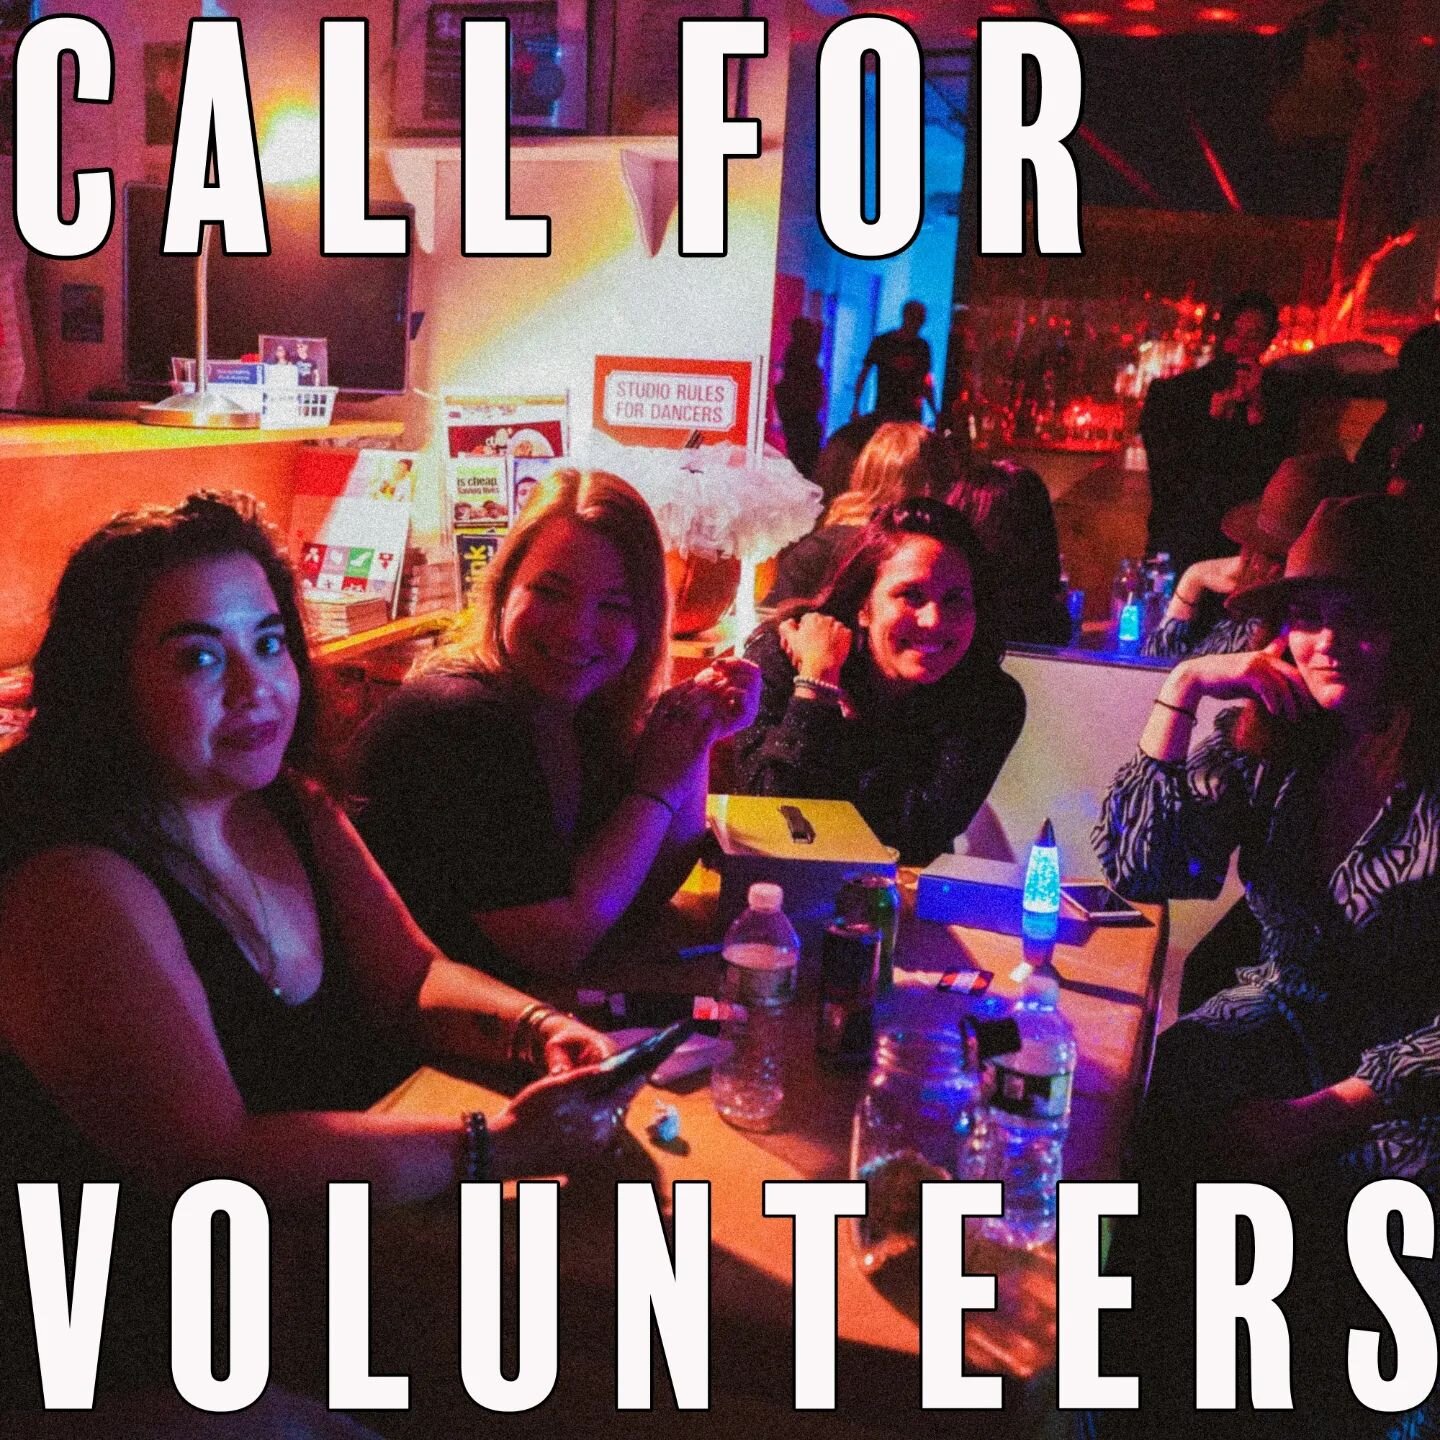 💜 What volunteering with @reprieveparty looks like!!! Join us!!! 📞 CALL FOR Volunteers for NYE 2023 with @bigvisionnyc ! 📨 DM either REPRIEVE, BIG VISION or 📨 e-mail us at we@reprieveparty.com
⠀⠀⠀⠀⠀⠀⠀⠀⠀⠀⠀⠀⠀⠀⠀
✨ Donate your time and get free entry